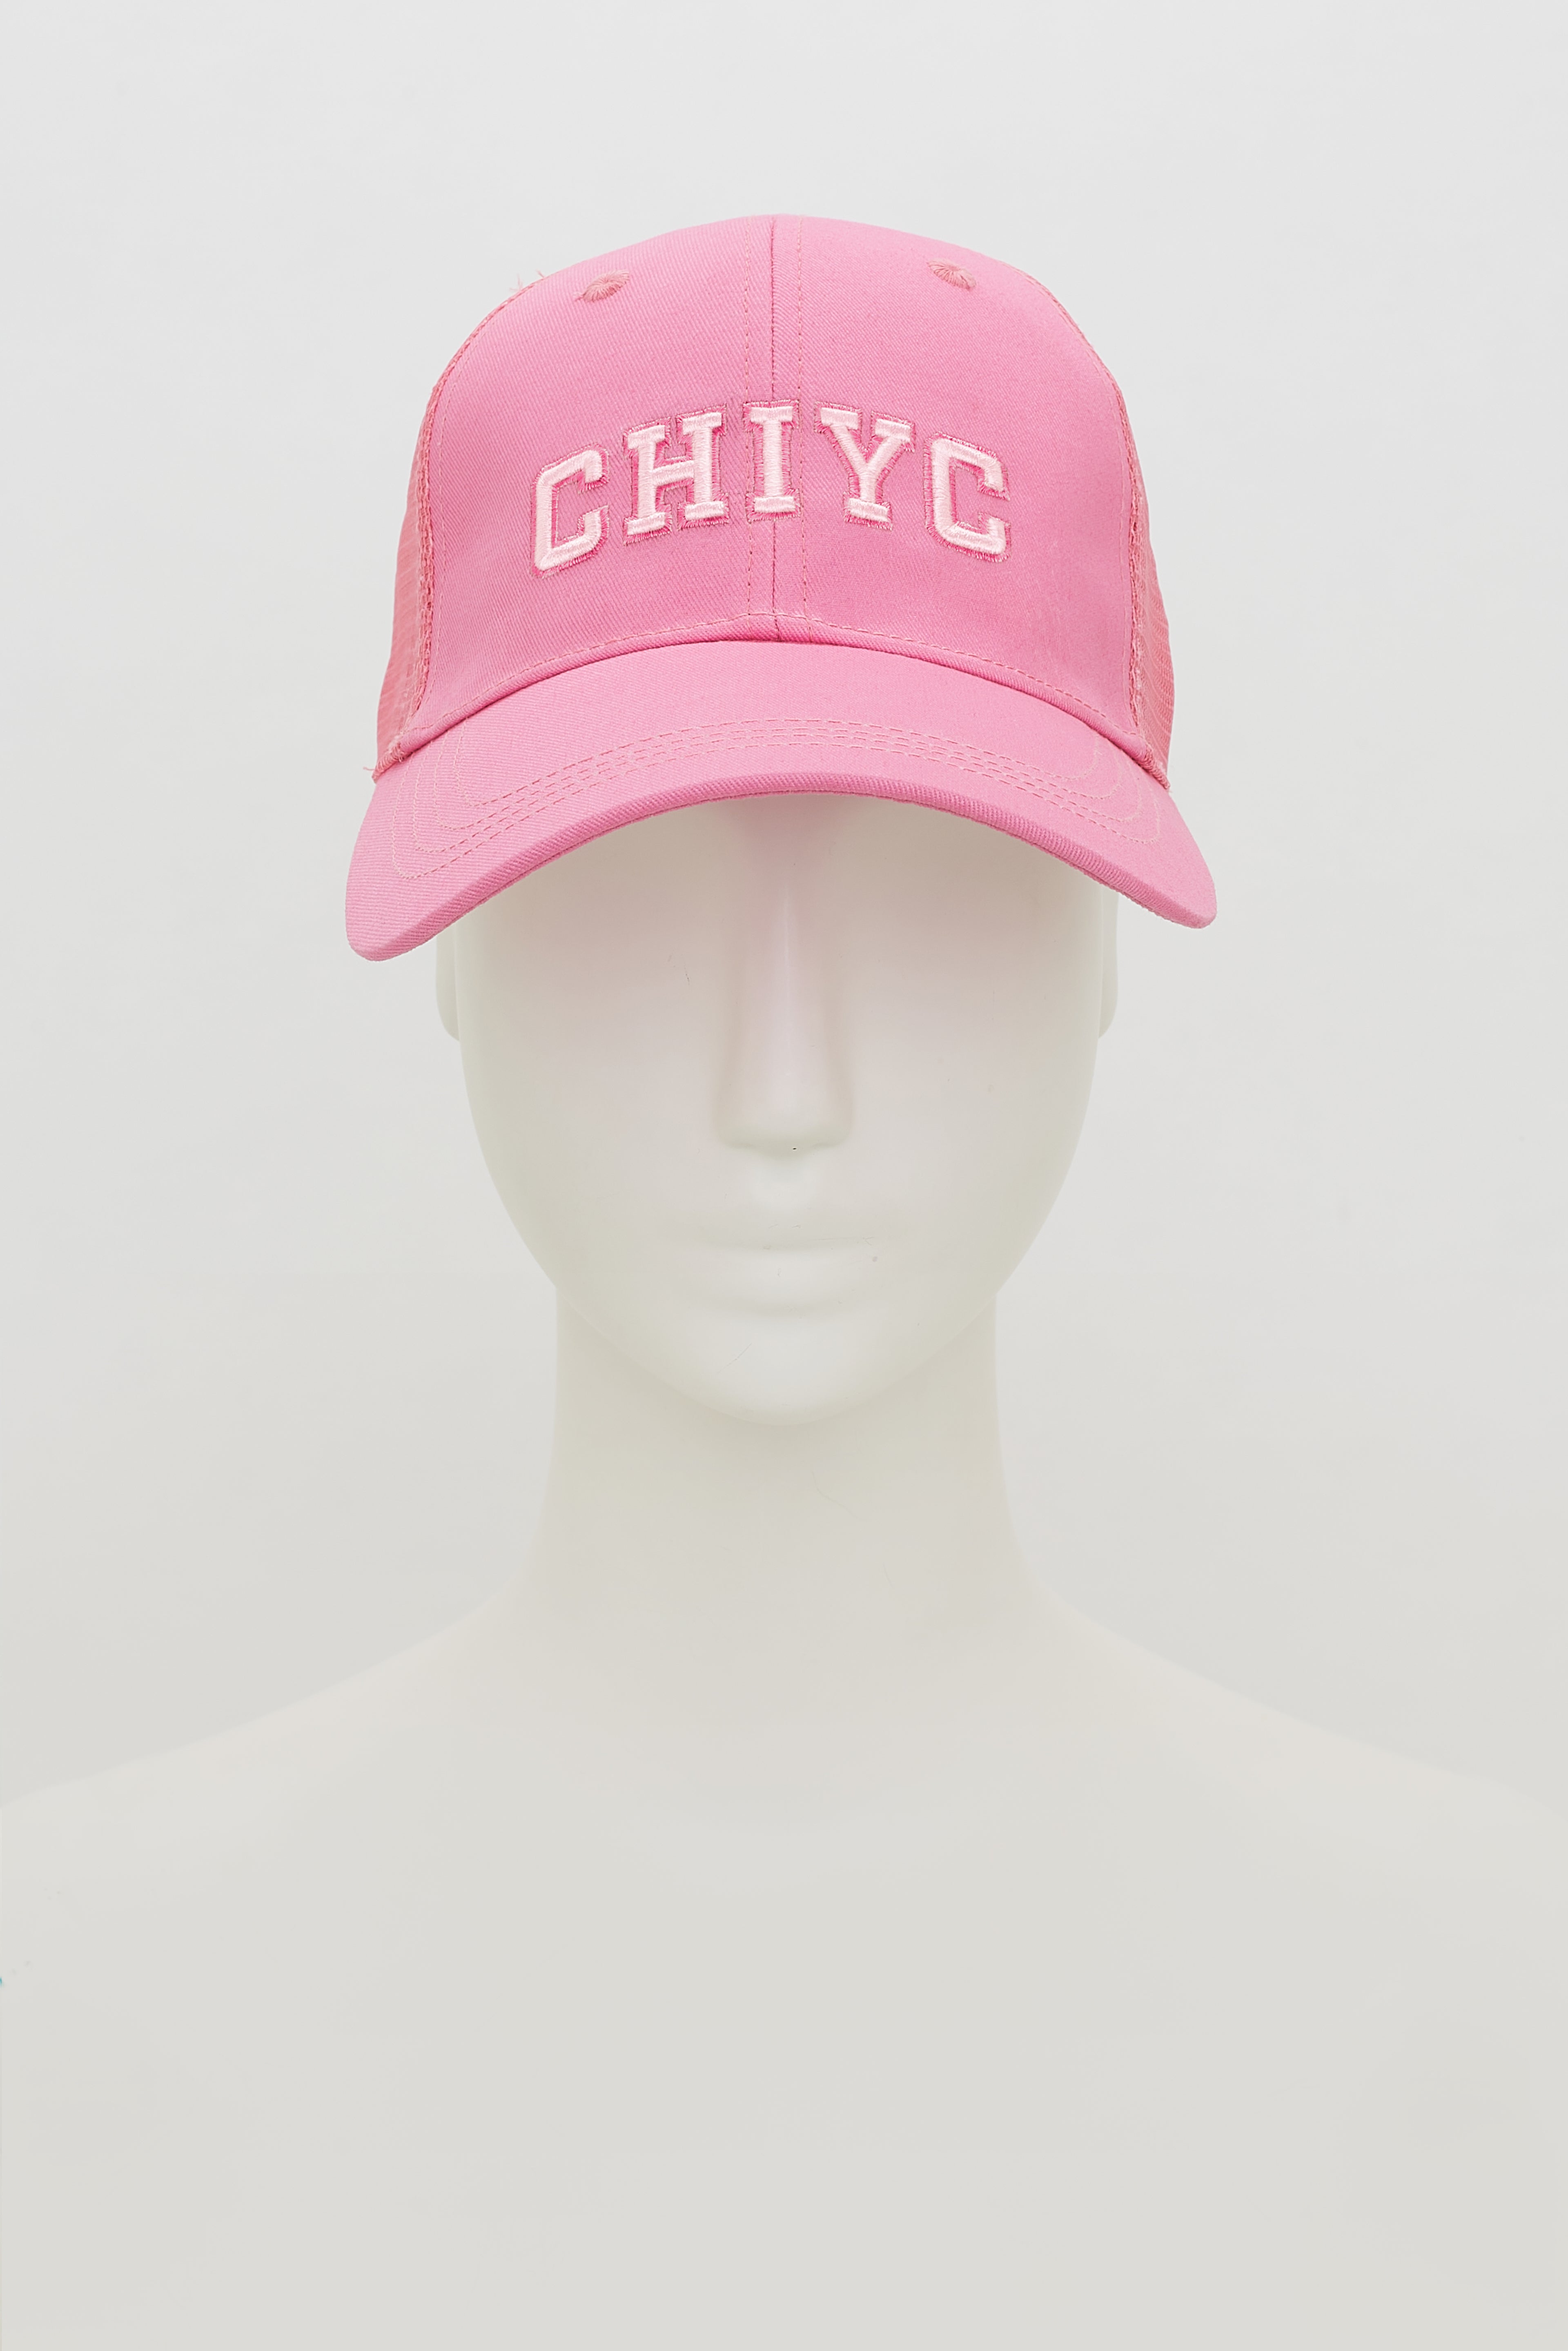 Dorothee-Schumacher-OUTLET-SALE-CHIYC-baseball-cap-Accessoires-OS-shaded-pink.jpg